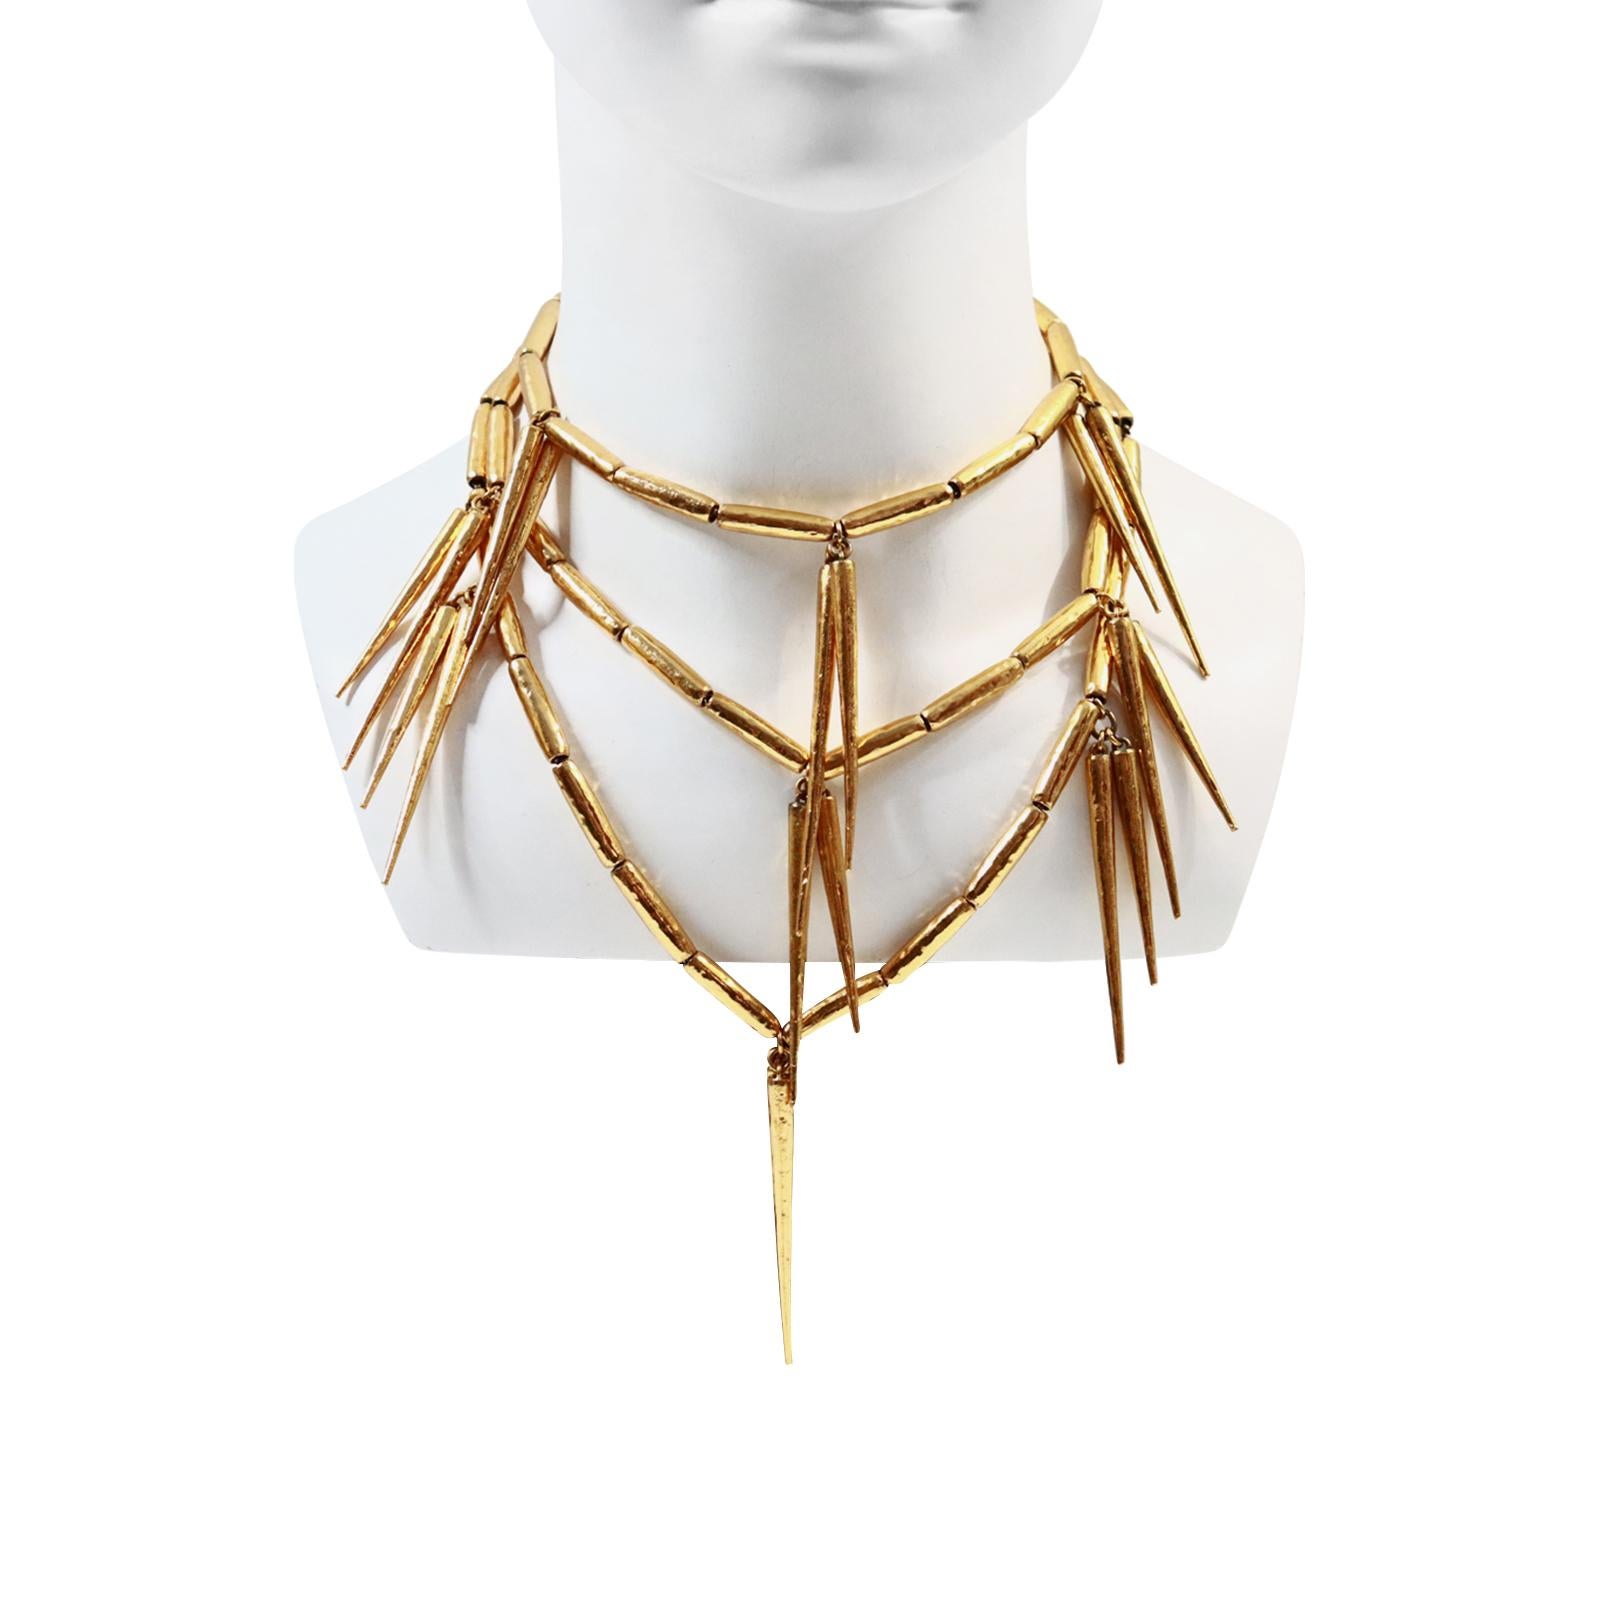 Vintage Christian Dior Gold Spike Necklace Circa 1980s For Sale 7